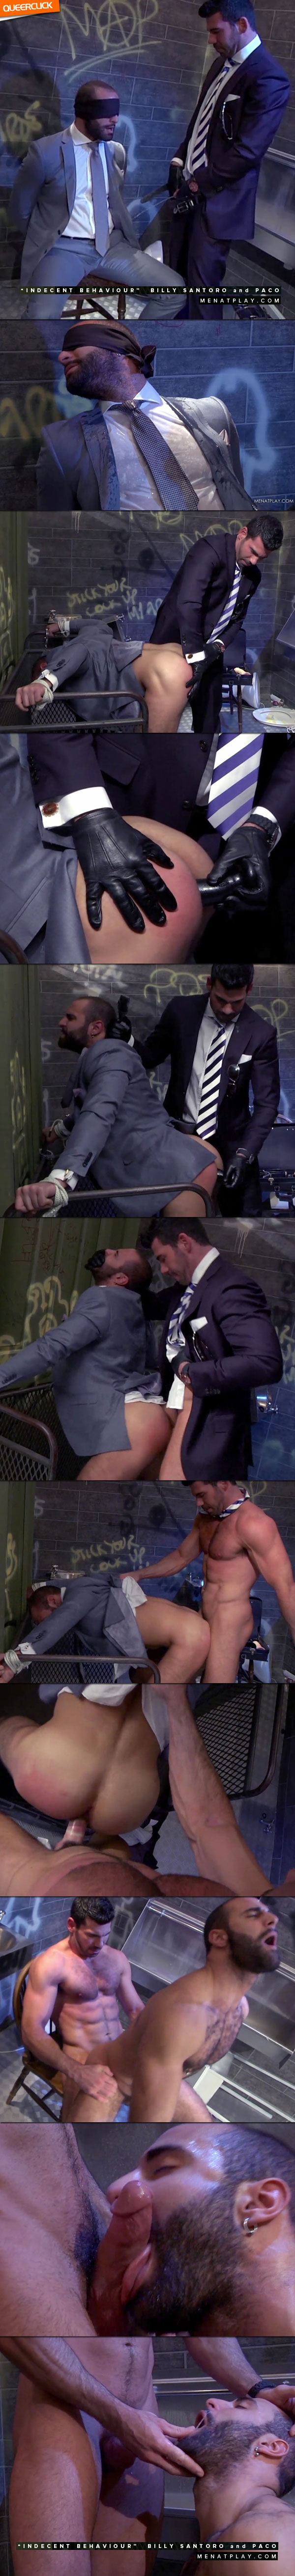 Men At Play: Indecent Behaviour - Billy Santoro and Paco